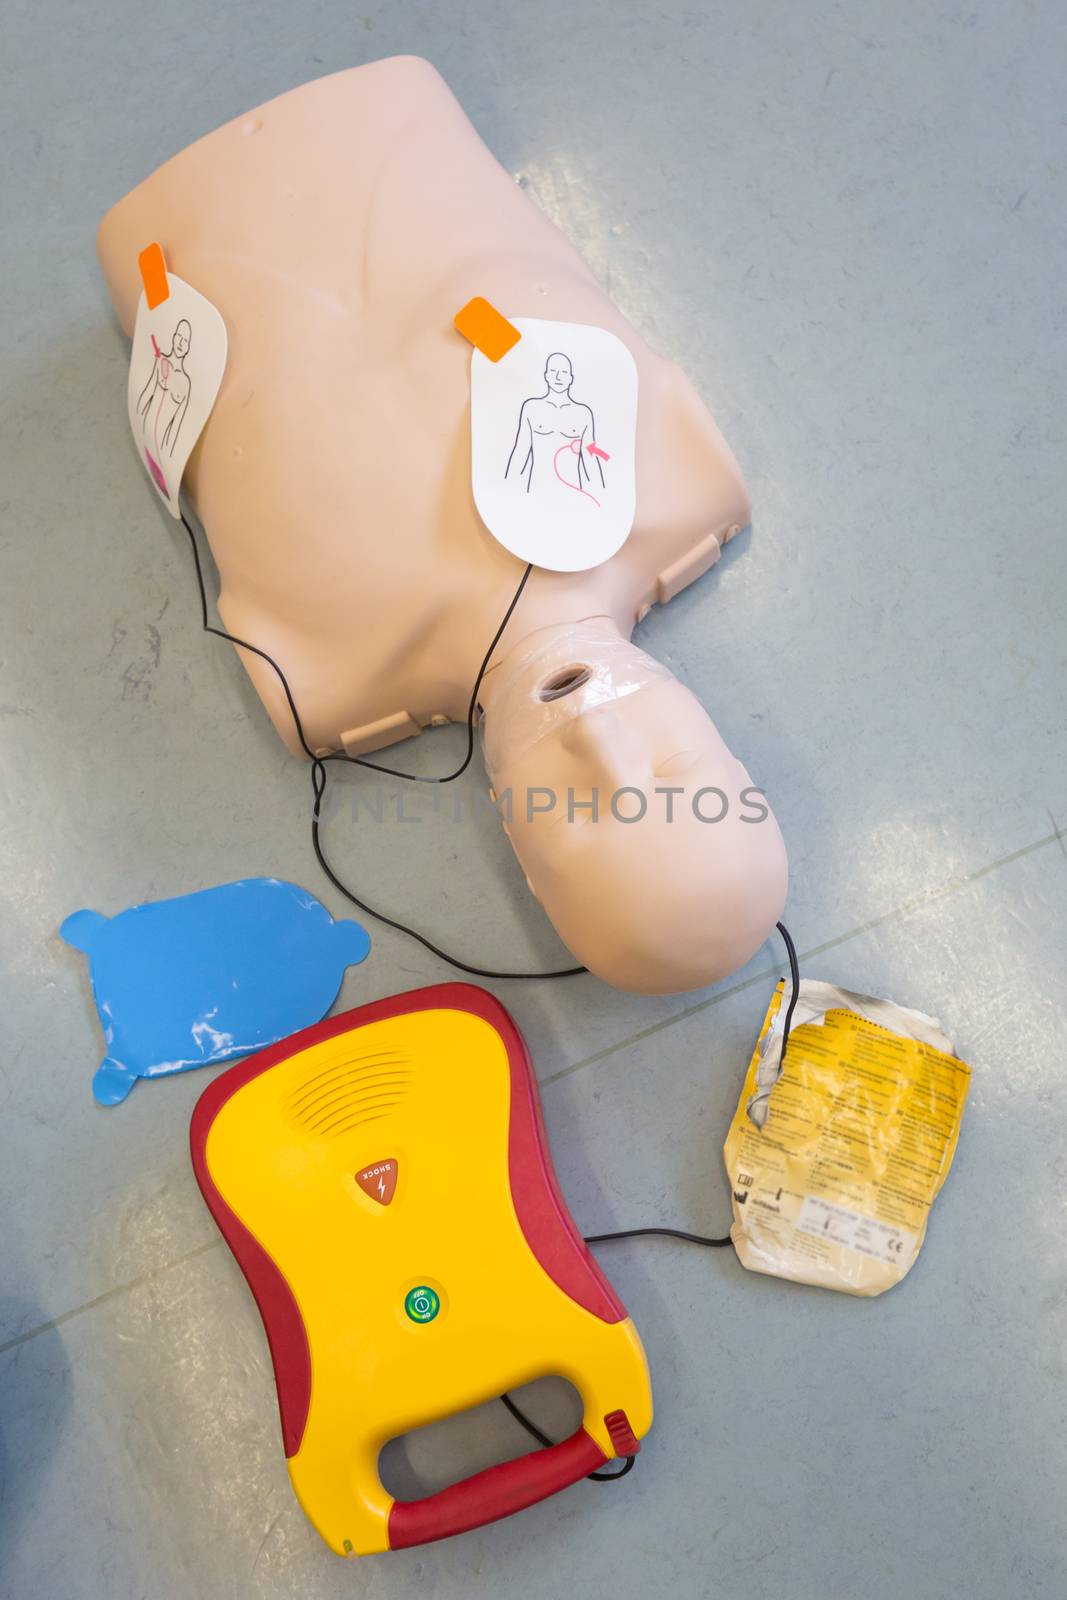 First aid resuscitation course using AED. by kasto